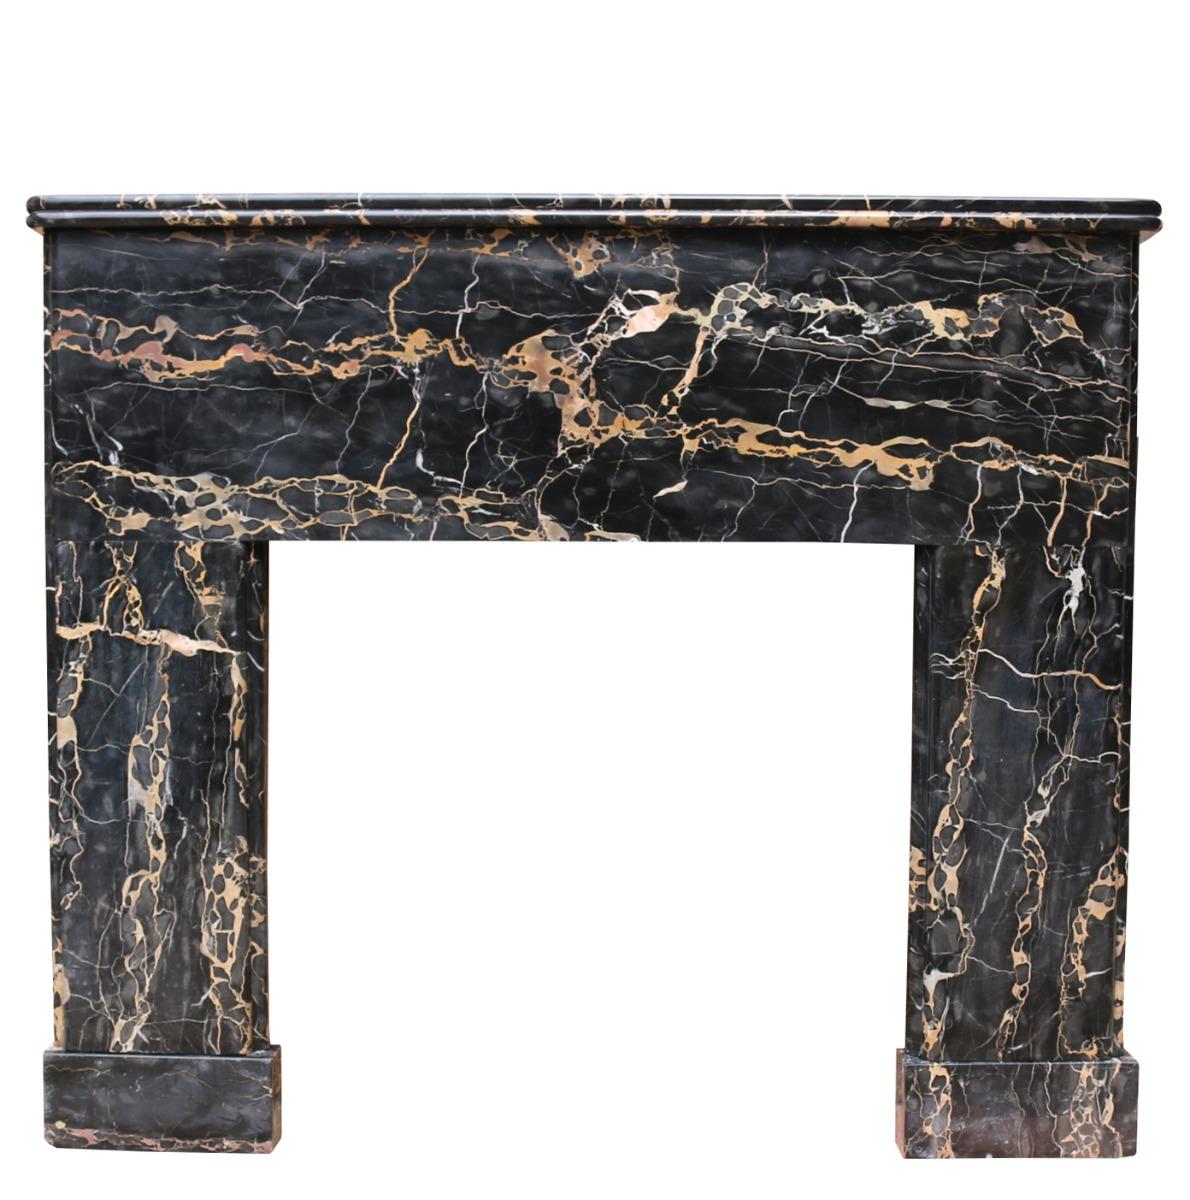 A striking Art Deco Period fire surround in Italian black and gold Portoro marble. Sourced from Belgium.

Additional Dimensions:

Opening Height 80 cm

Opening Width 83.5 cm

Width between outside of legs 142.5 cm.